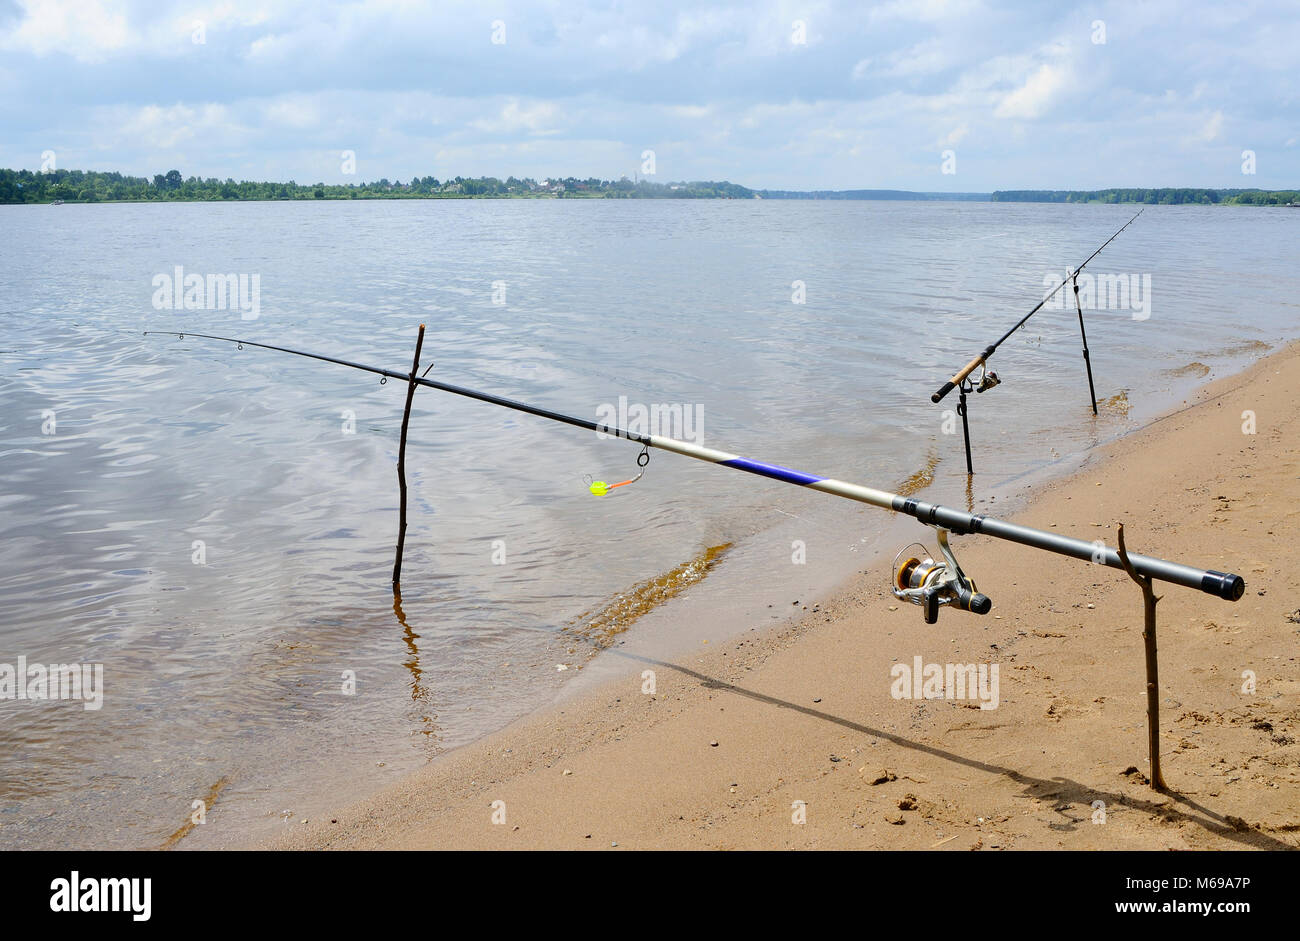 Fishing on the lake in the summer Stock Photo